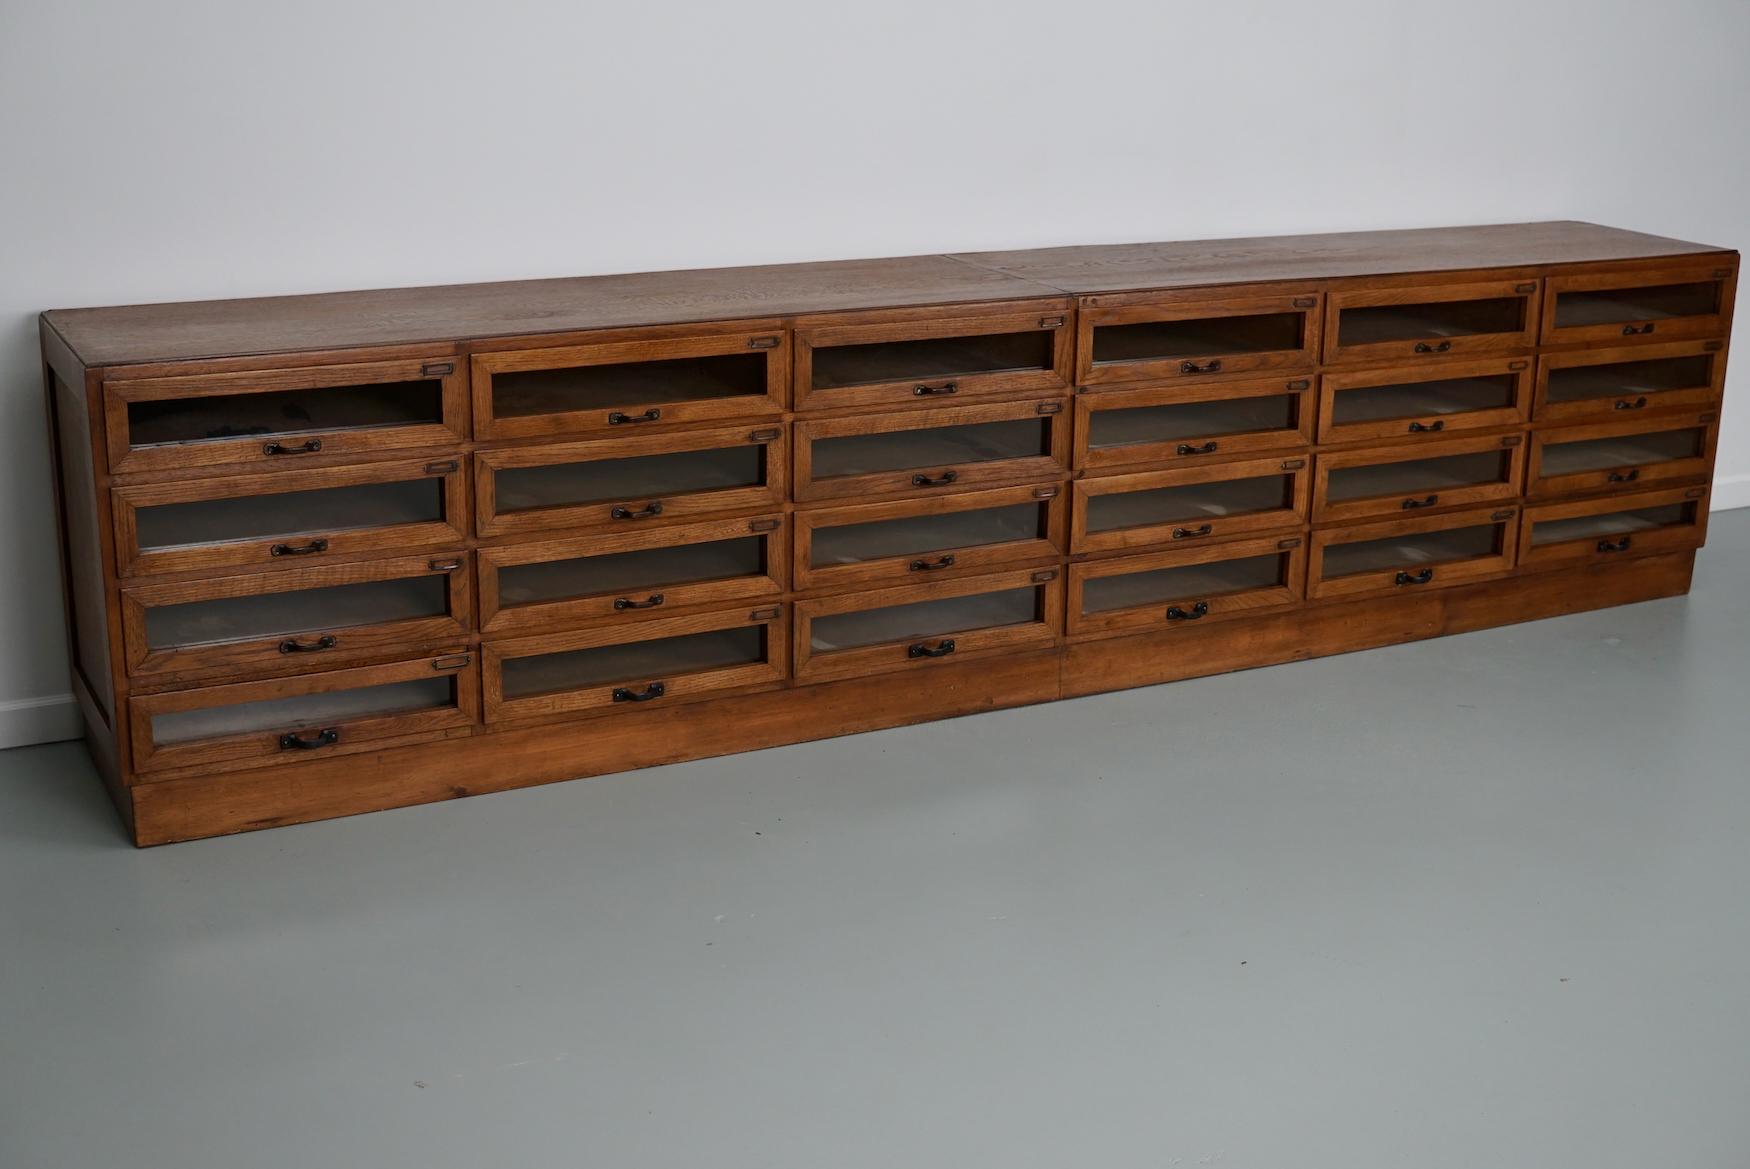 This haberdashery cabinet was produced during the 1950s in the Netherlands. It features 24 large drawers in oak with glass fronts and metal handles. The interior dimensions of the drawers are: DWH 40 x 45 x 10.5 cm.